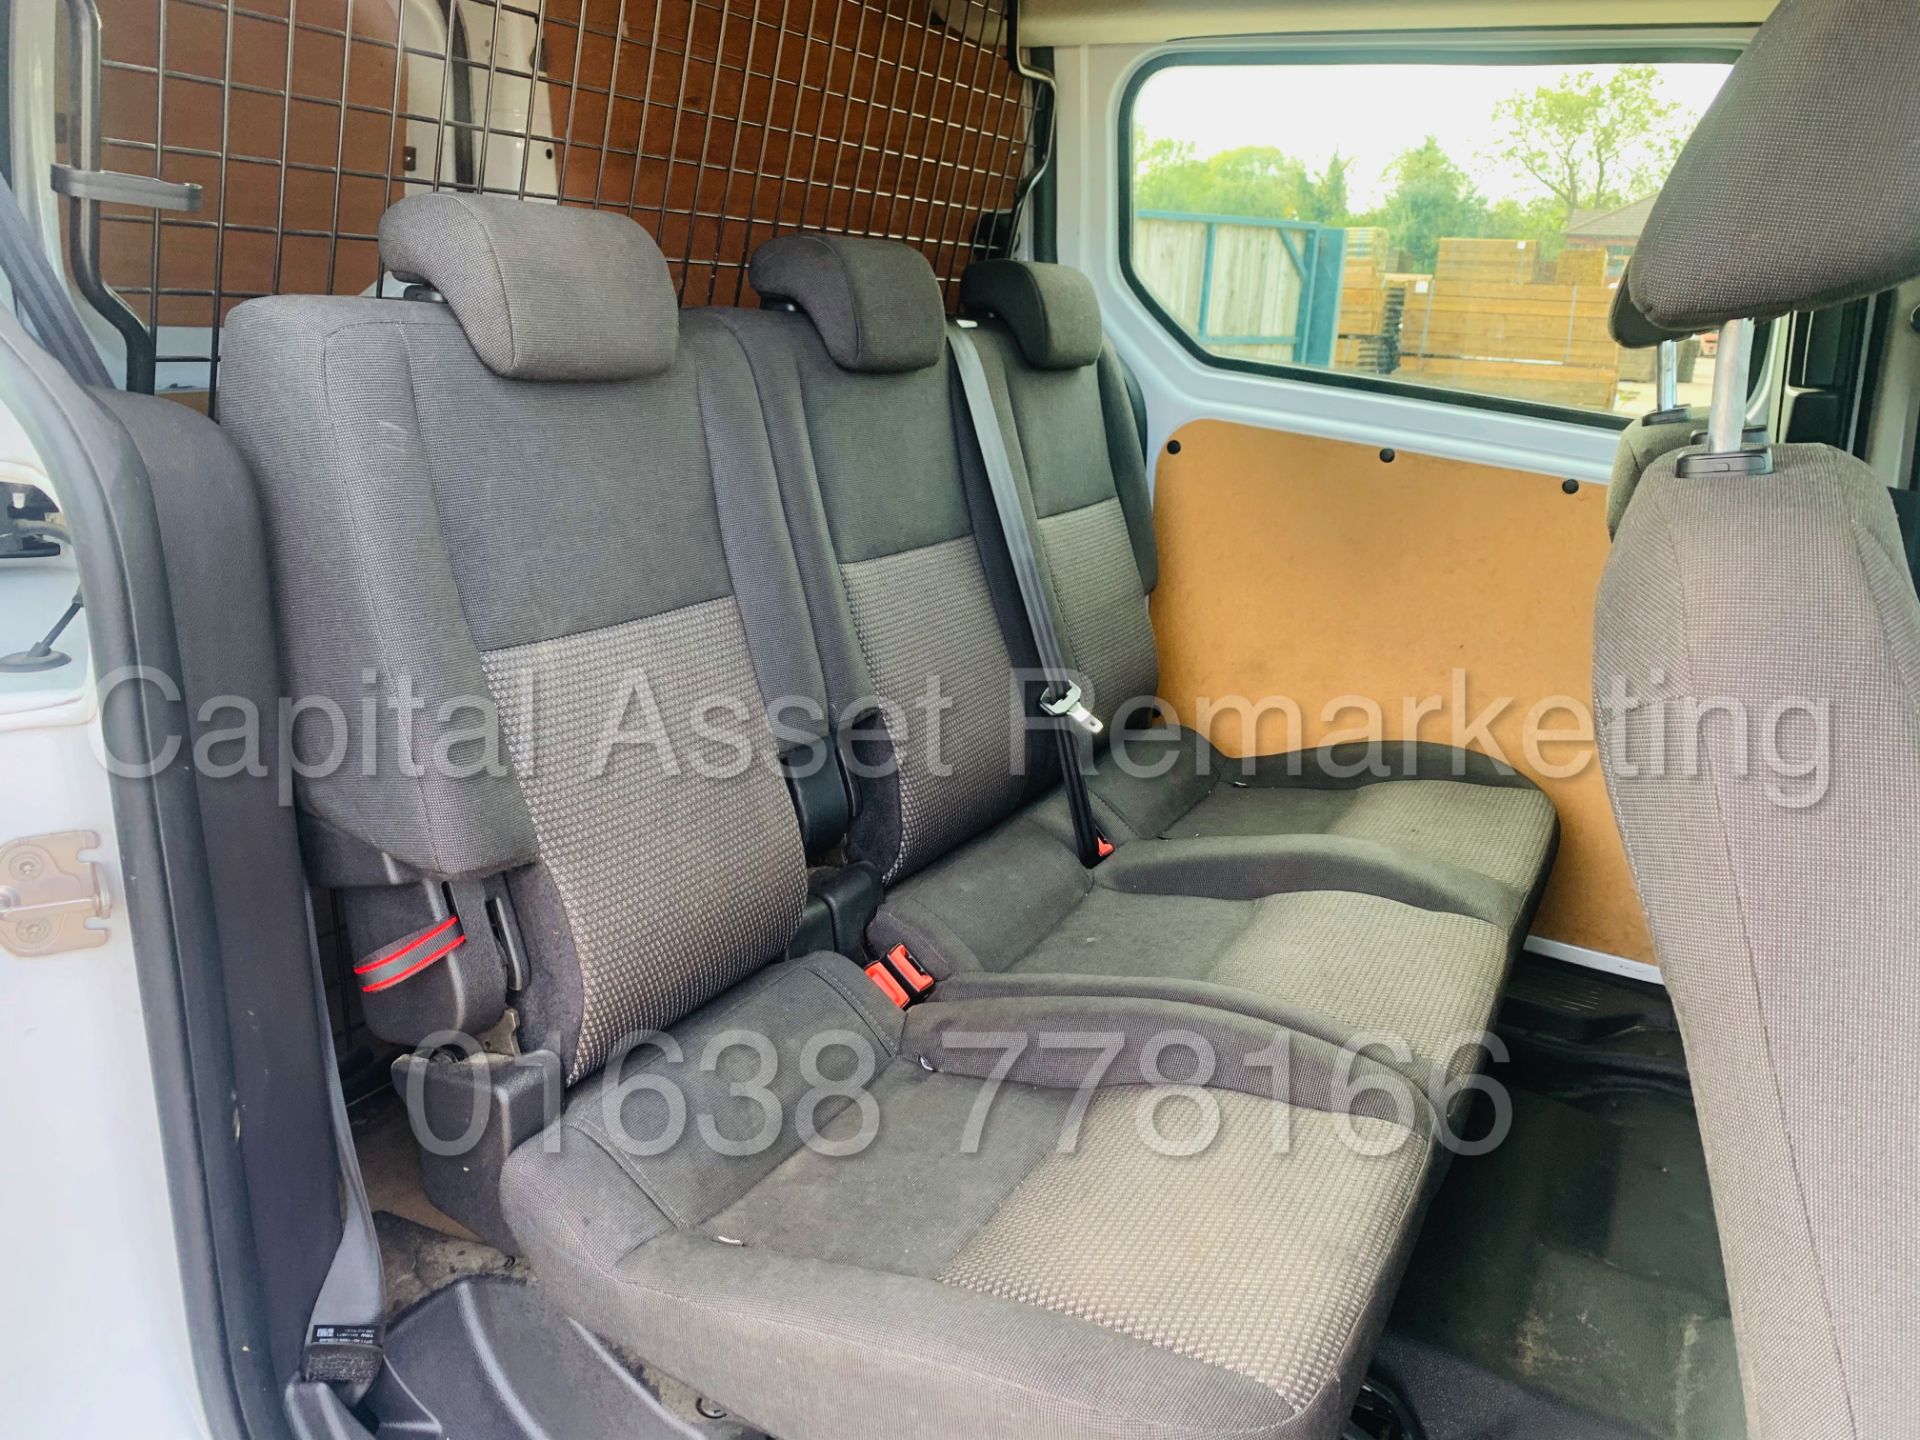 (ON SALE) FORD TRANSIT CONNECT *LWB - 5 SEATER CREW VAN* (2018 - EURO 6) 1.5 TDCI *A/C* (1 OWNER) - Image 25 of 40